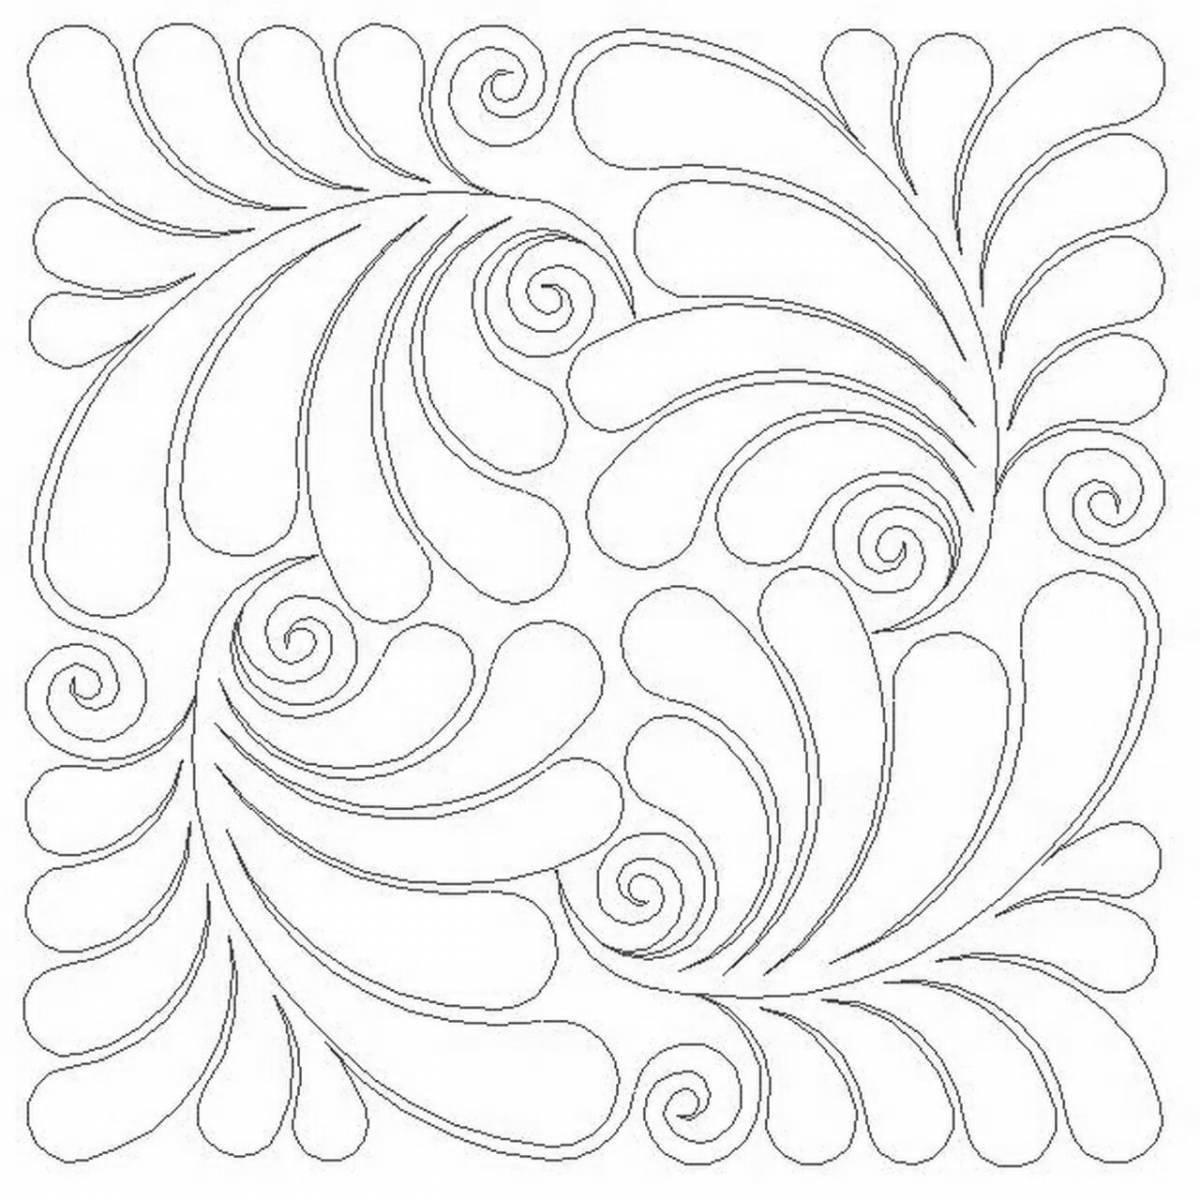 Exquisite frost patterns coloring pages